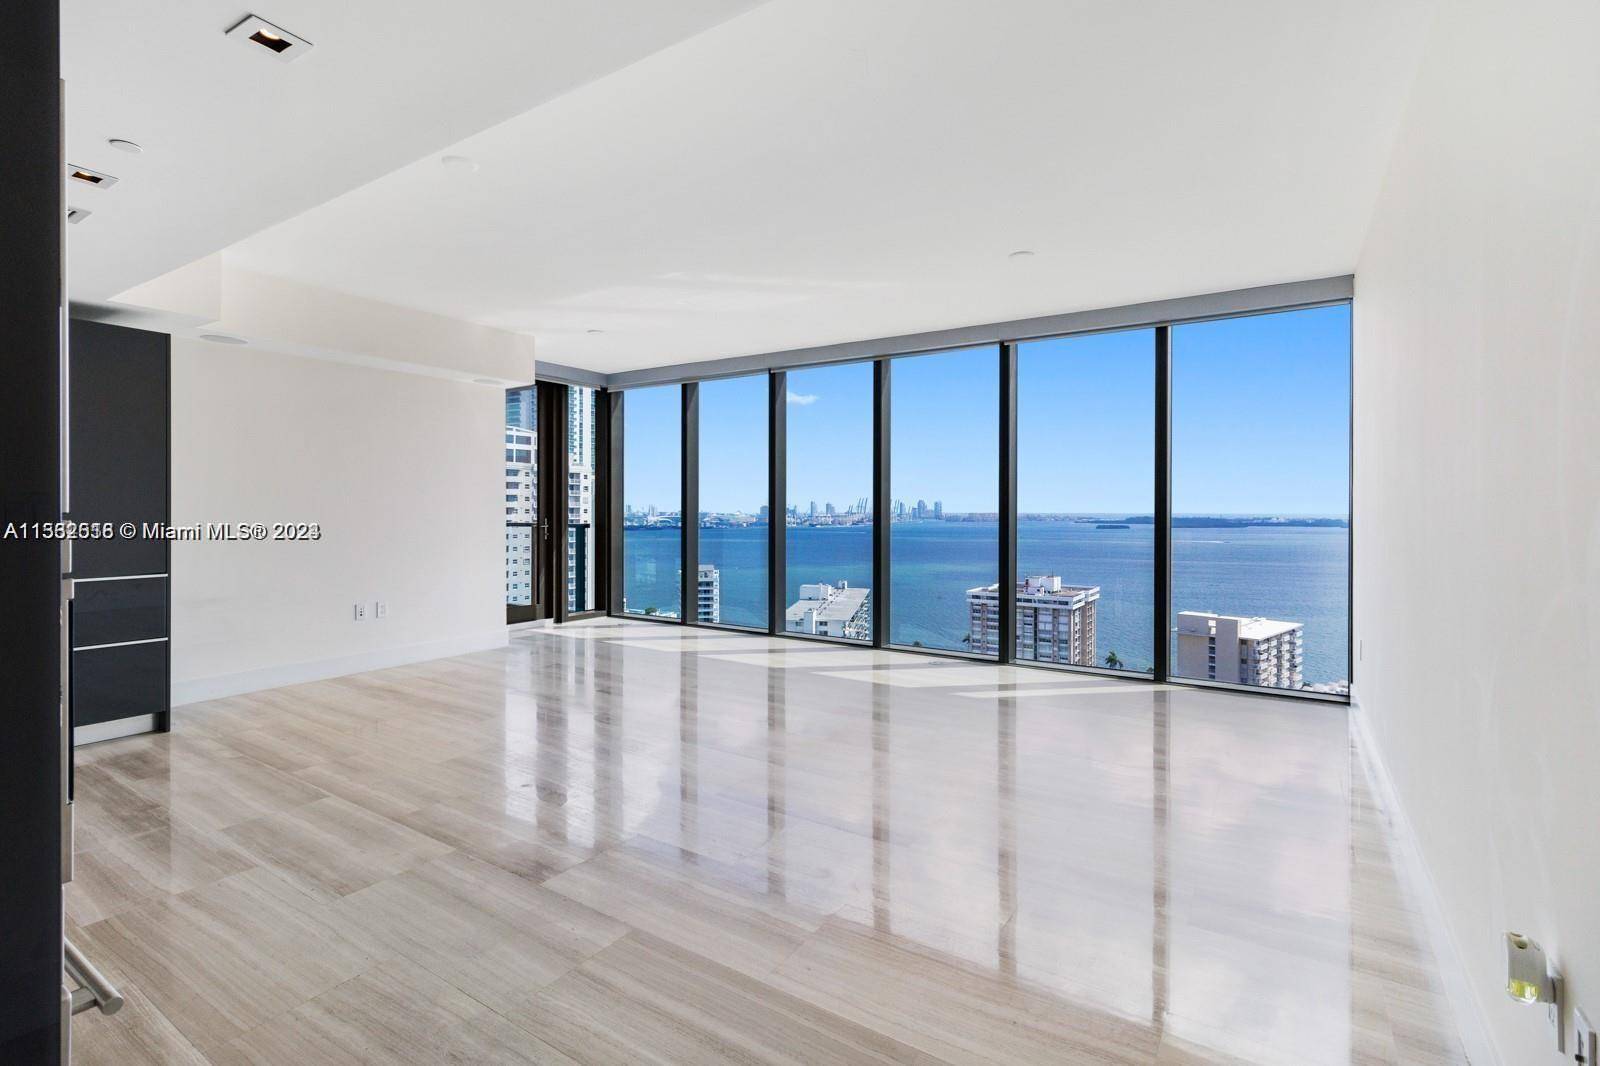 EXQUISITE 2 BEDS 2. 5 BATHS CORNER UNIT AT THE MAGNIFICENT ECHO BRICKELL.